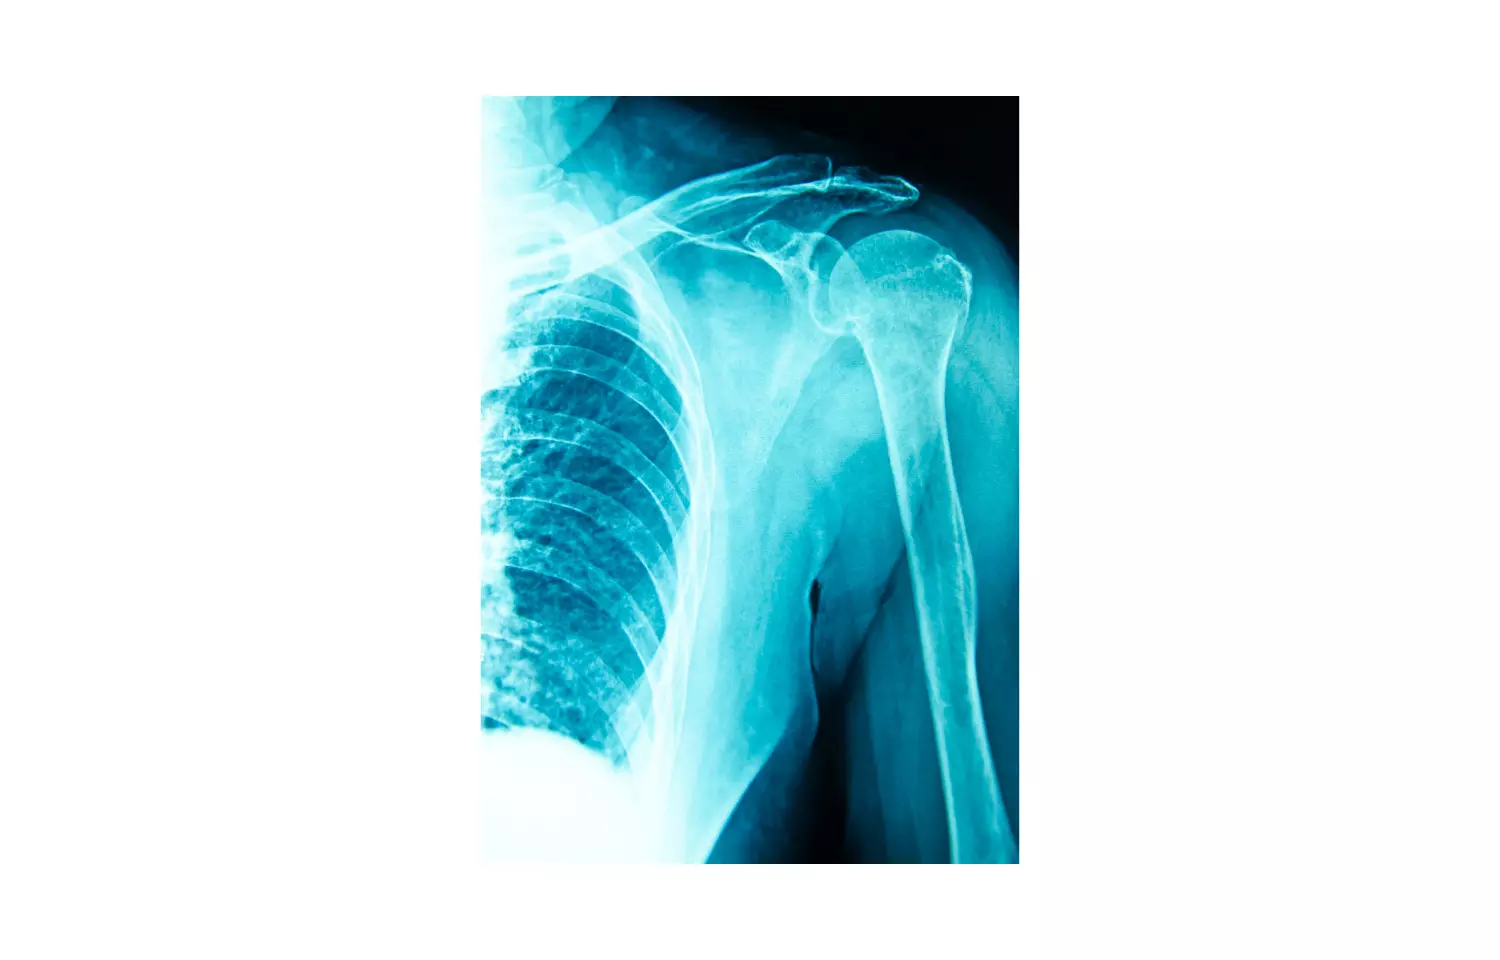 Subacromial decompression no better than other therapies for return to work in shoulder impingement